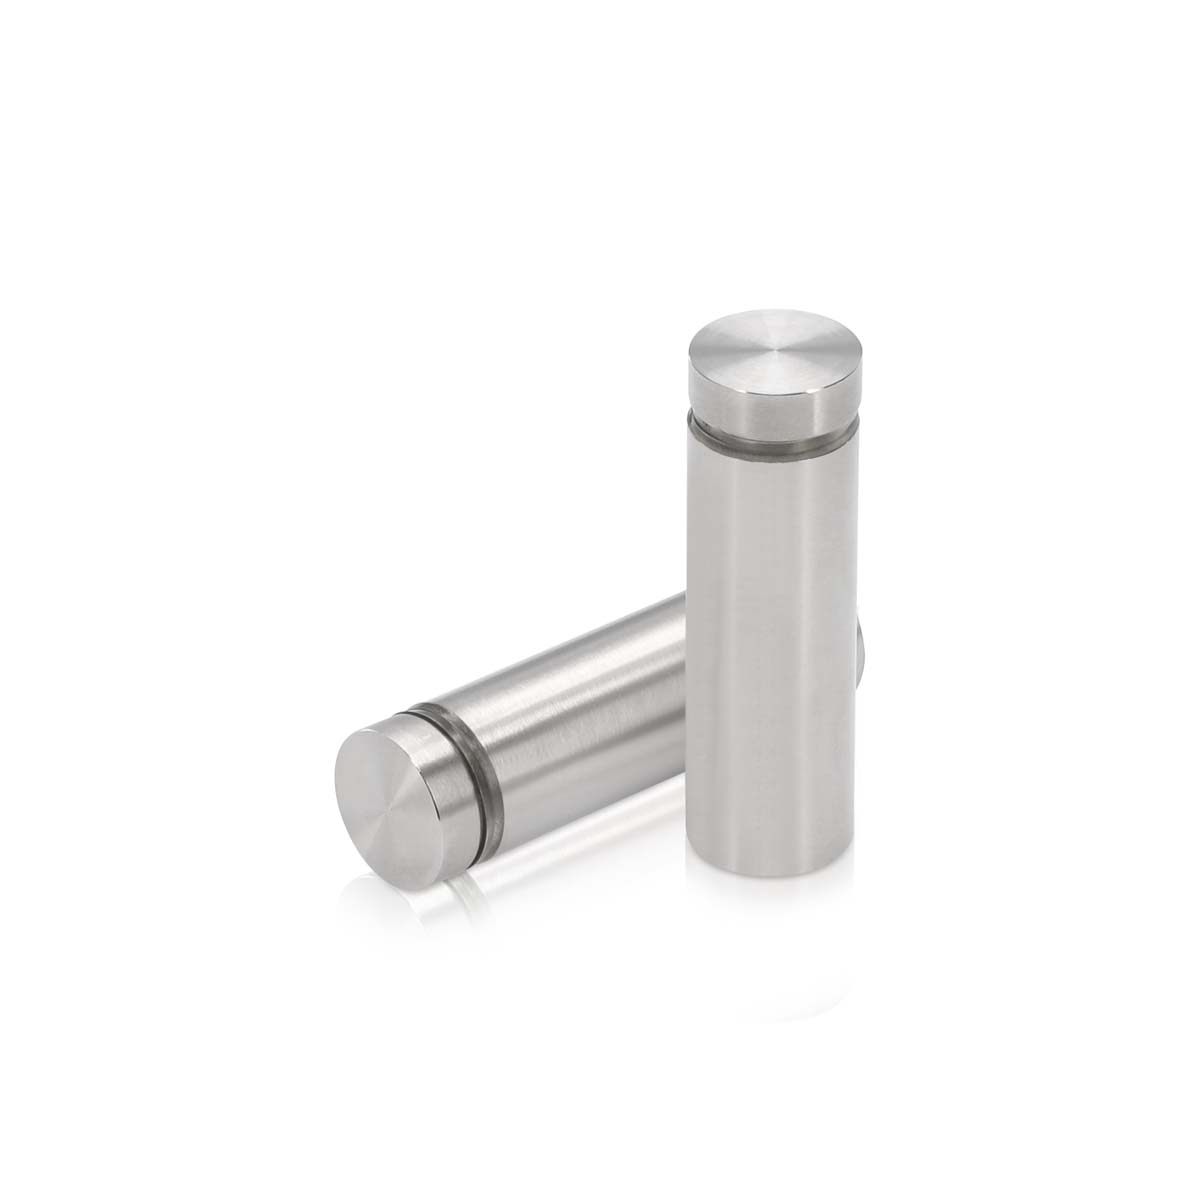 5/8'' Diameter X 1-3/4'' Barrel Length, Stainless Steel Brushed Finish. Easy Fasten Standoff (For Inside Use Only) [Required Material Hole Size: 7/16'']